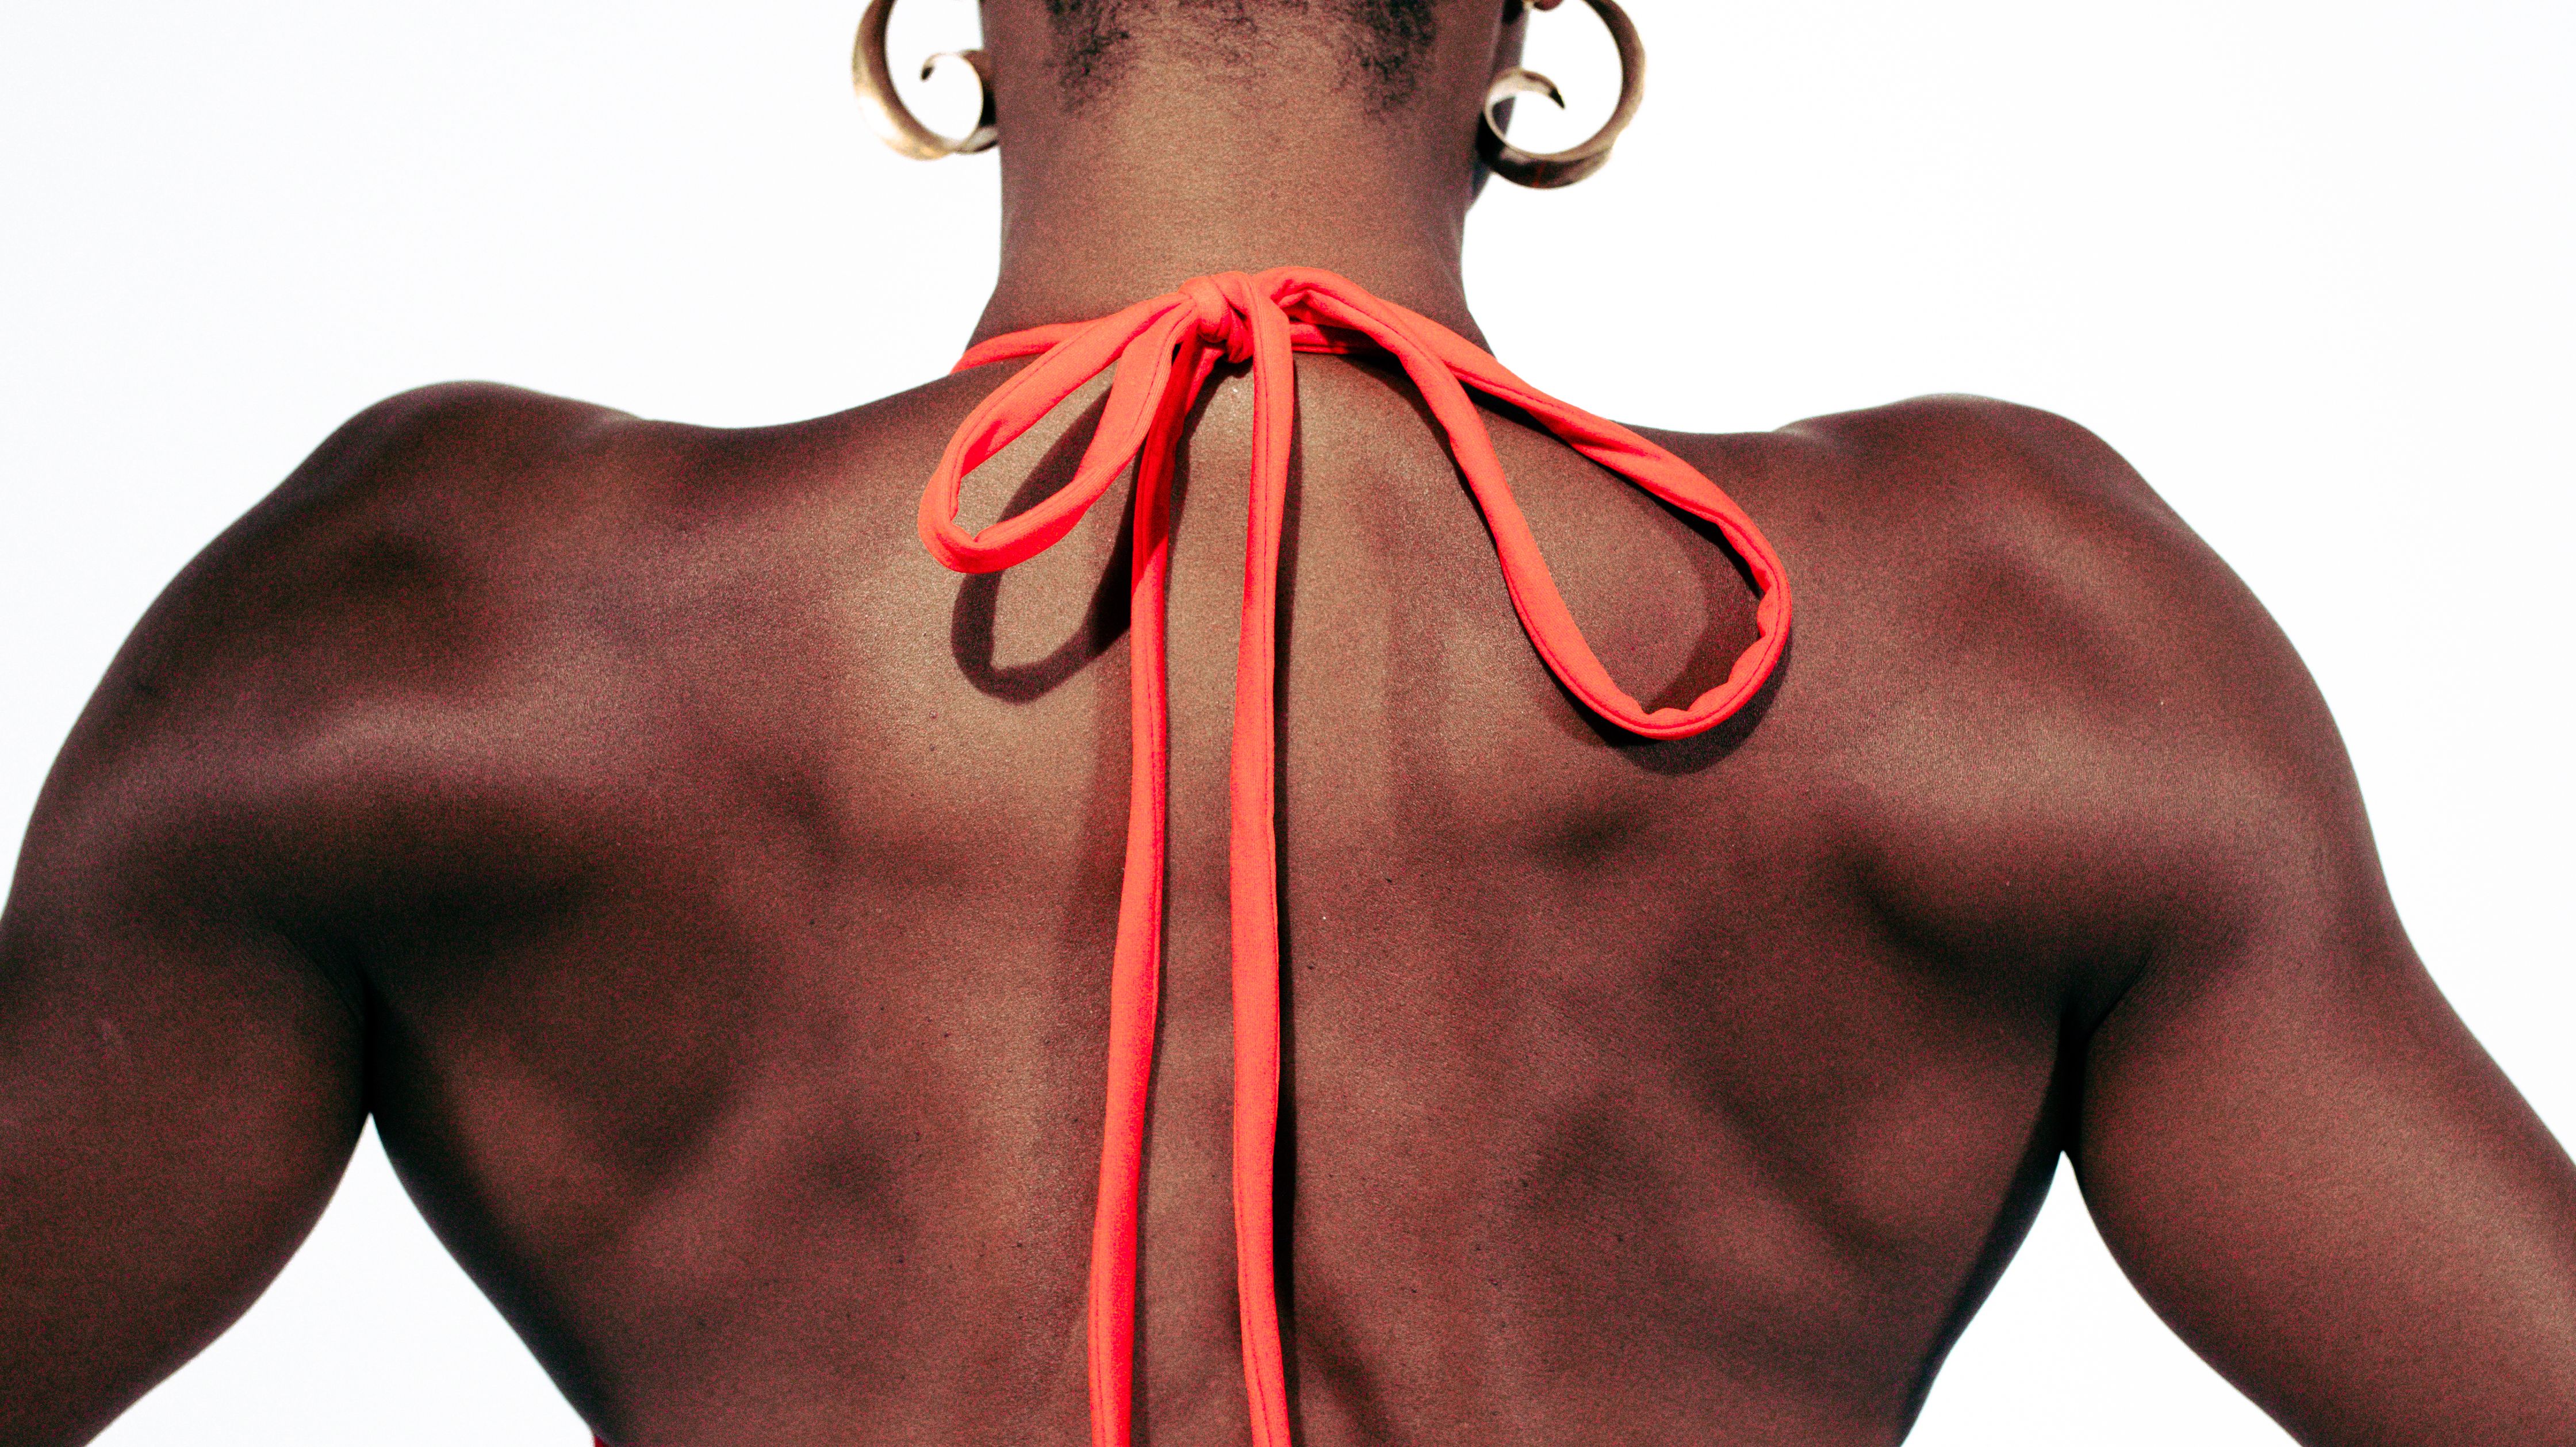 Photograph of the back of a woman from the waist up, wearing an orange red string bikini top, tied in bows at the neck and across the chest.